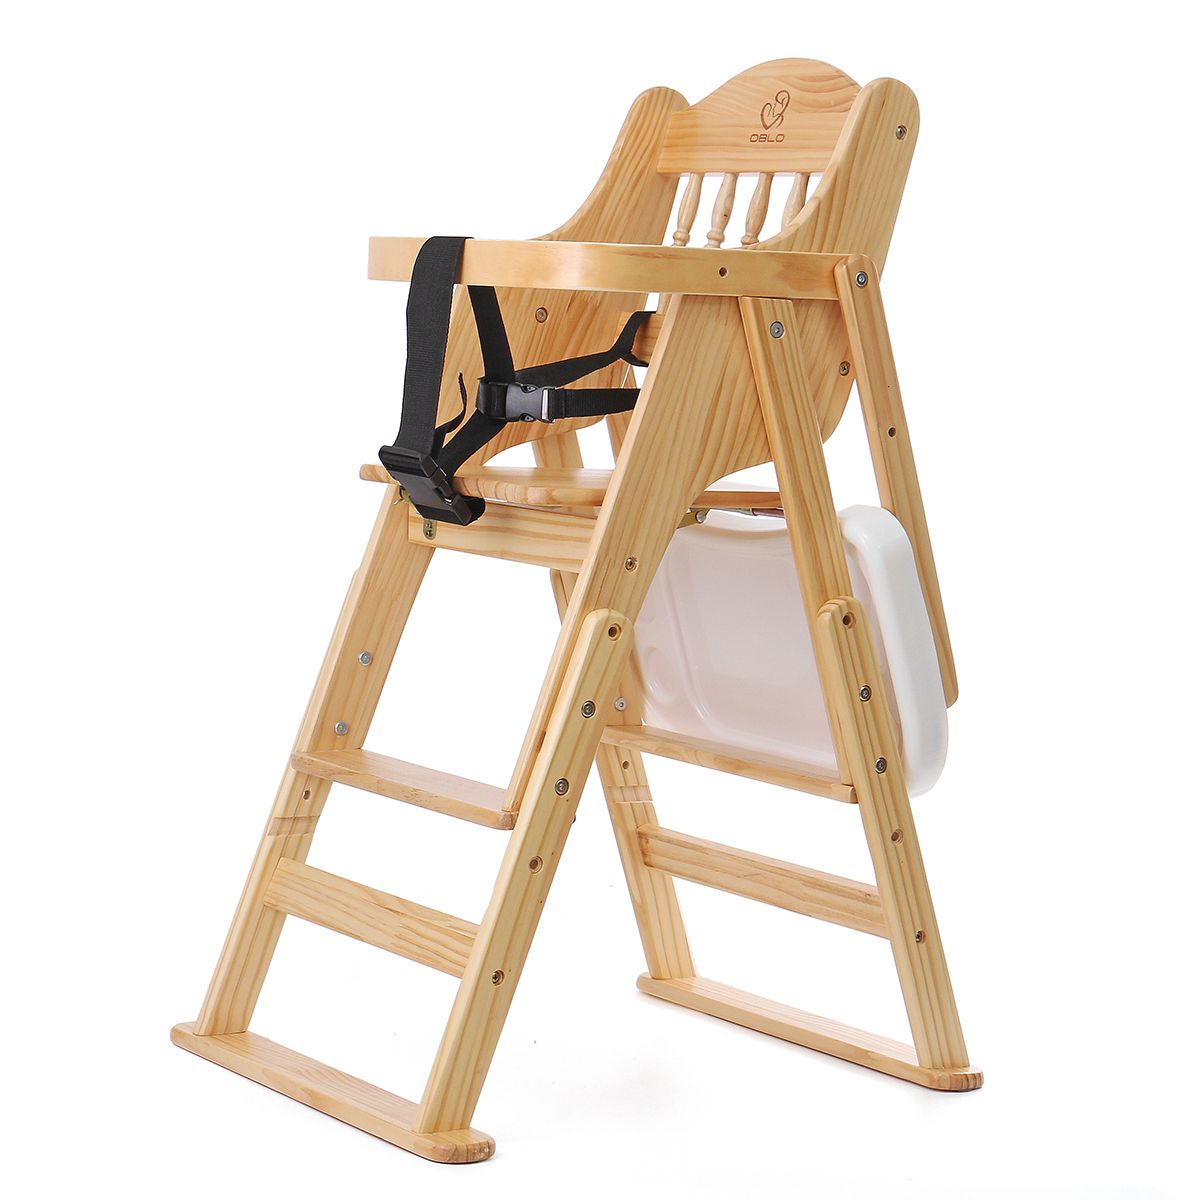 Folding-Adjustable-Baby-Wooden-High-Chair-Table-Seat-Toddler-Feeding-Highchair-1667638